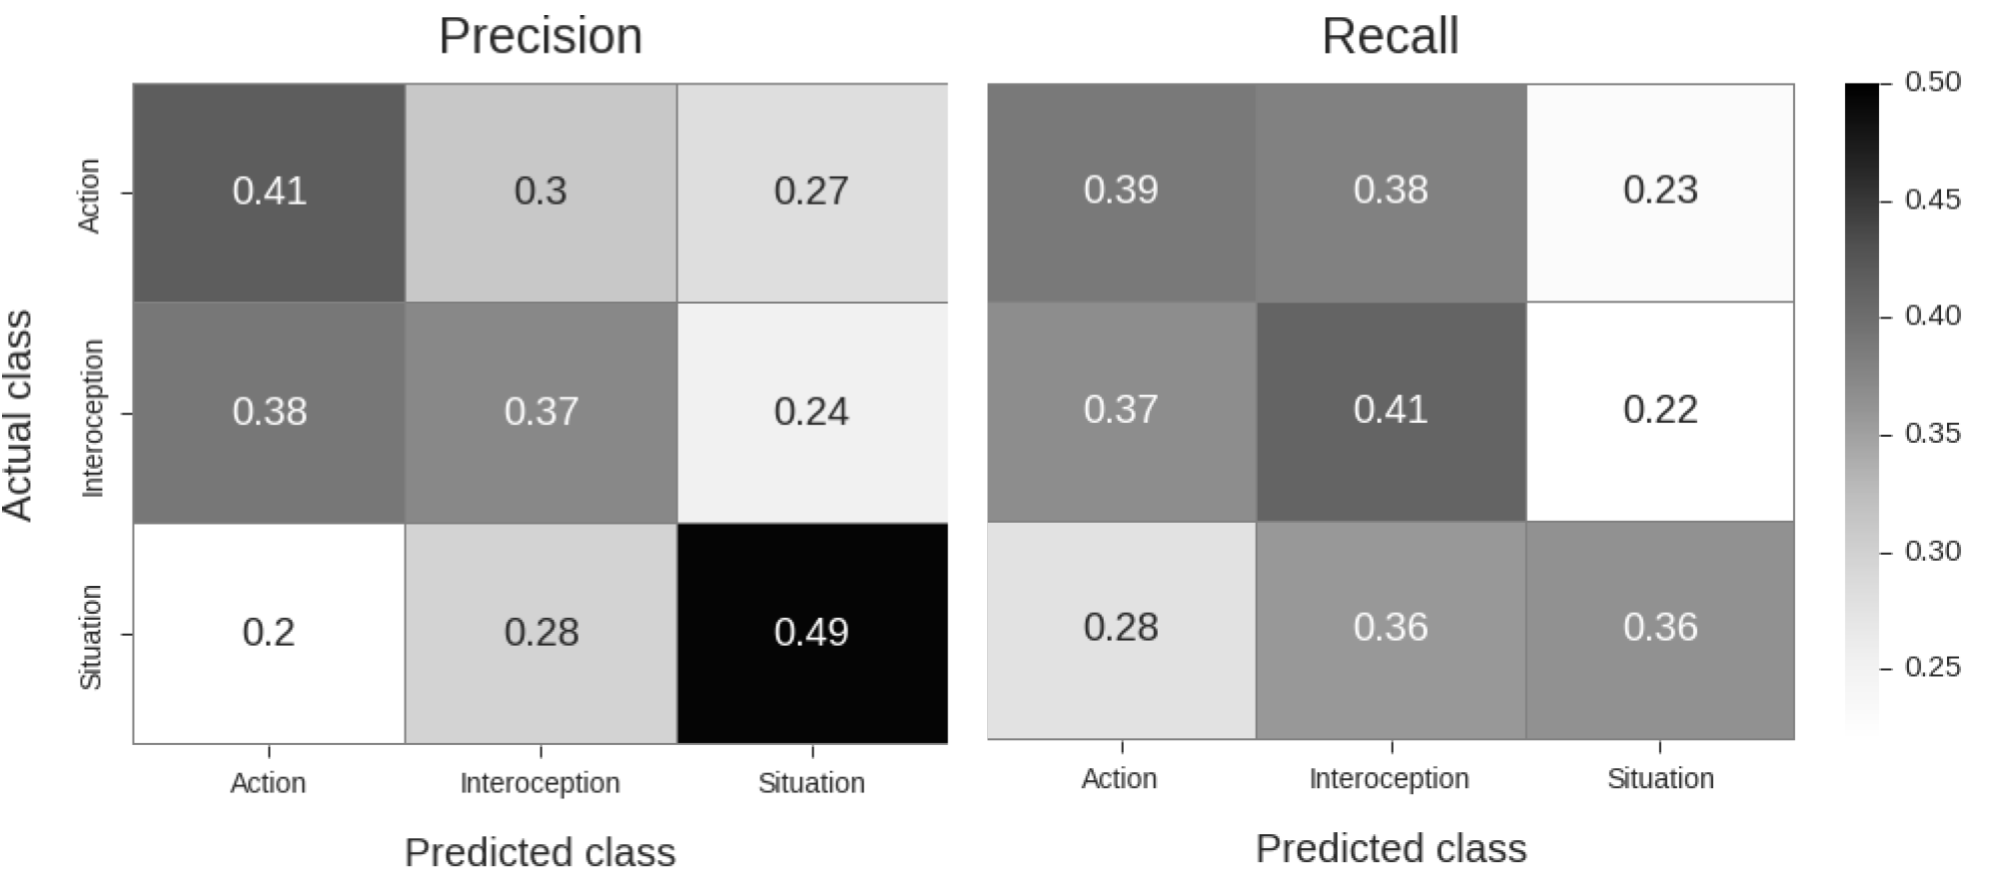 Confusion matrices with precision (left matrix) and recall (right matrix) estimates of the other-to-self decoding analysis. The MVPA-pipeline used was exactly the same as for the (self-to-other) cross-analysis in the main text. P-values corresponding to the classification scores were calculated using a permutation analysis with 1000 permutations of the other-to-self analysis with randomly shuffled class-labels. Similar to the self-to-other analysis, the precision-scores for all classes in the other-to-self analysis were significant, p(action) < 0.001, p(interoception) = 0.008, p(situation) < 0.001. For recall, classification scores for action and interoception were significant (both p < 0.001), but not significant for situation (p = 0.062). The discrepancy between the self-to-other and other-to-self decoding analyses can be explained by two factors. First, the other-to-self classifier was trained on fewer samples (i.e. 90 trials) than the self-to-other classifier (which was trained on 120 trials), which may cause a substantial drop in power. Second, the preprocessing pipeline and MVPA hyperparameters were optimized based on the self-analysis and self-to-other cross-analysis. Given the vast differences between the nature of the self- and other-data, these optimal preprocessing and MVPA hyperparameters for the original analyses may not cross-validate well to the other-to-self decoding analysis.